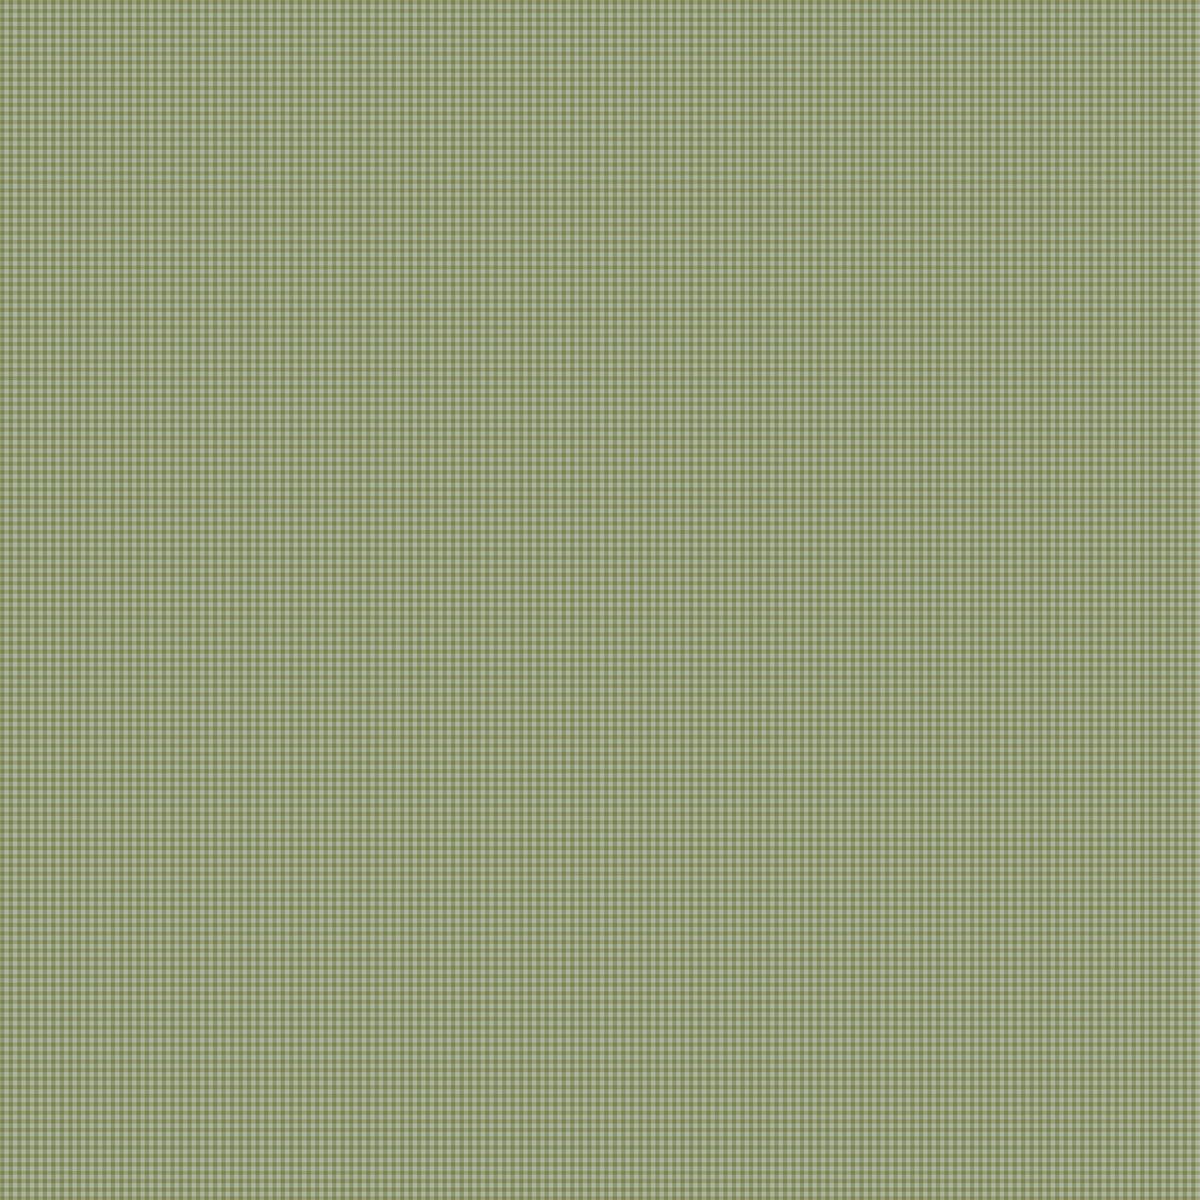 Gingham Olive Fabric by Voyage Maison